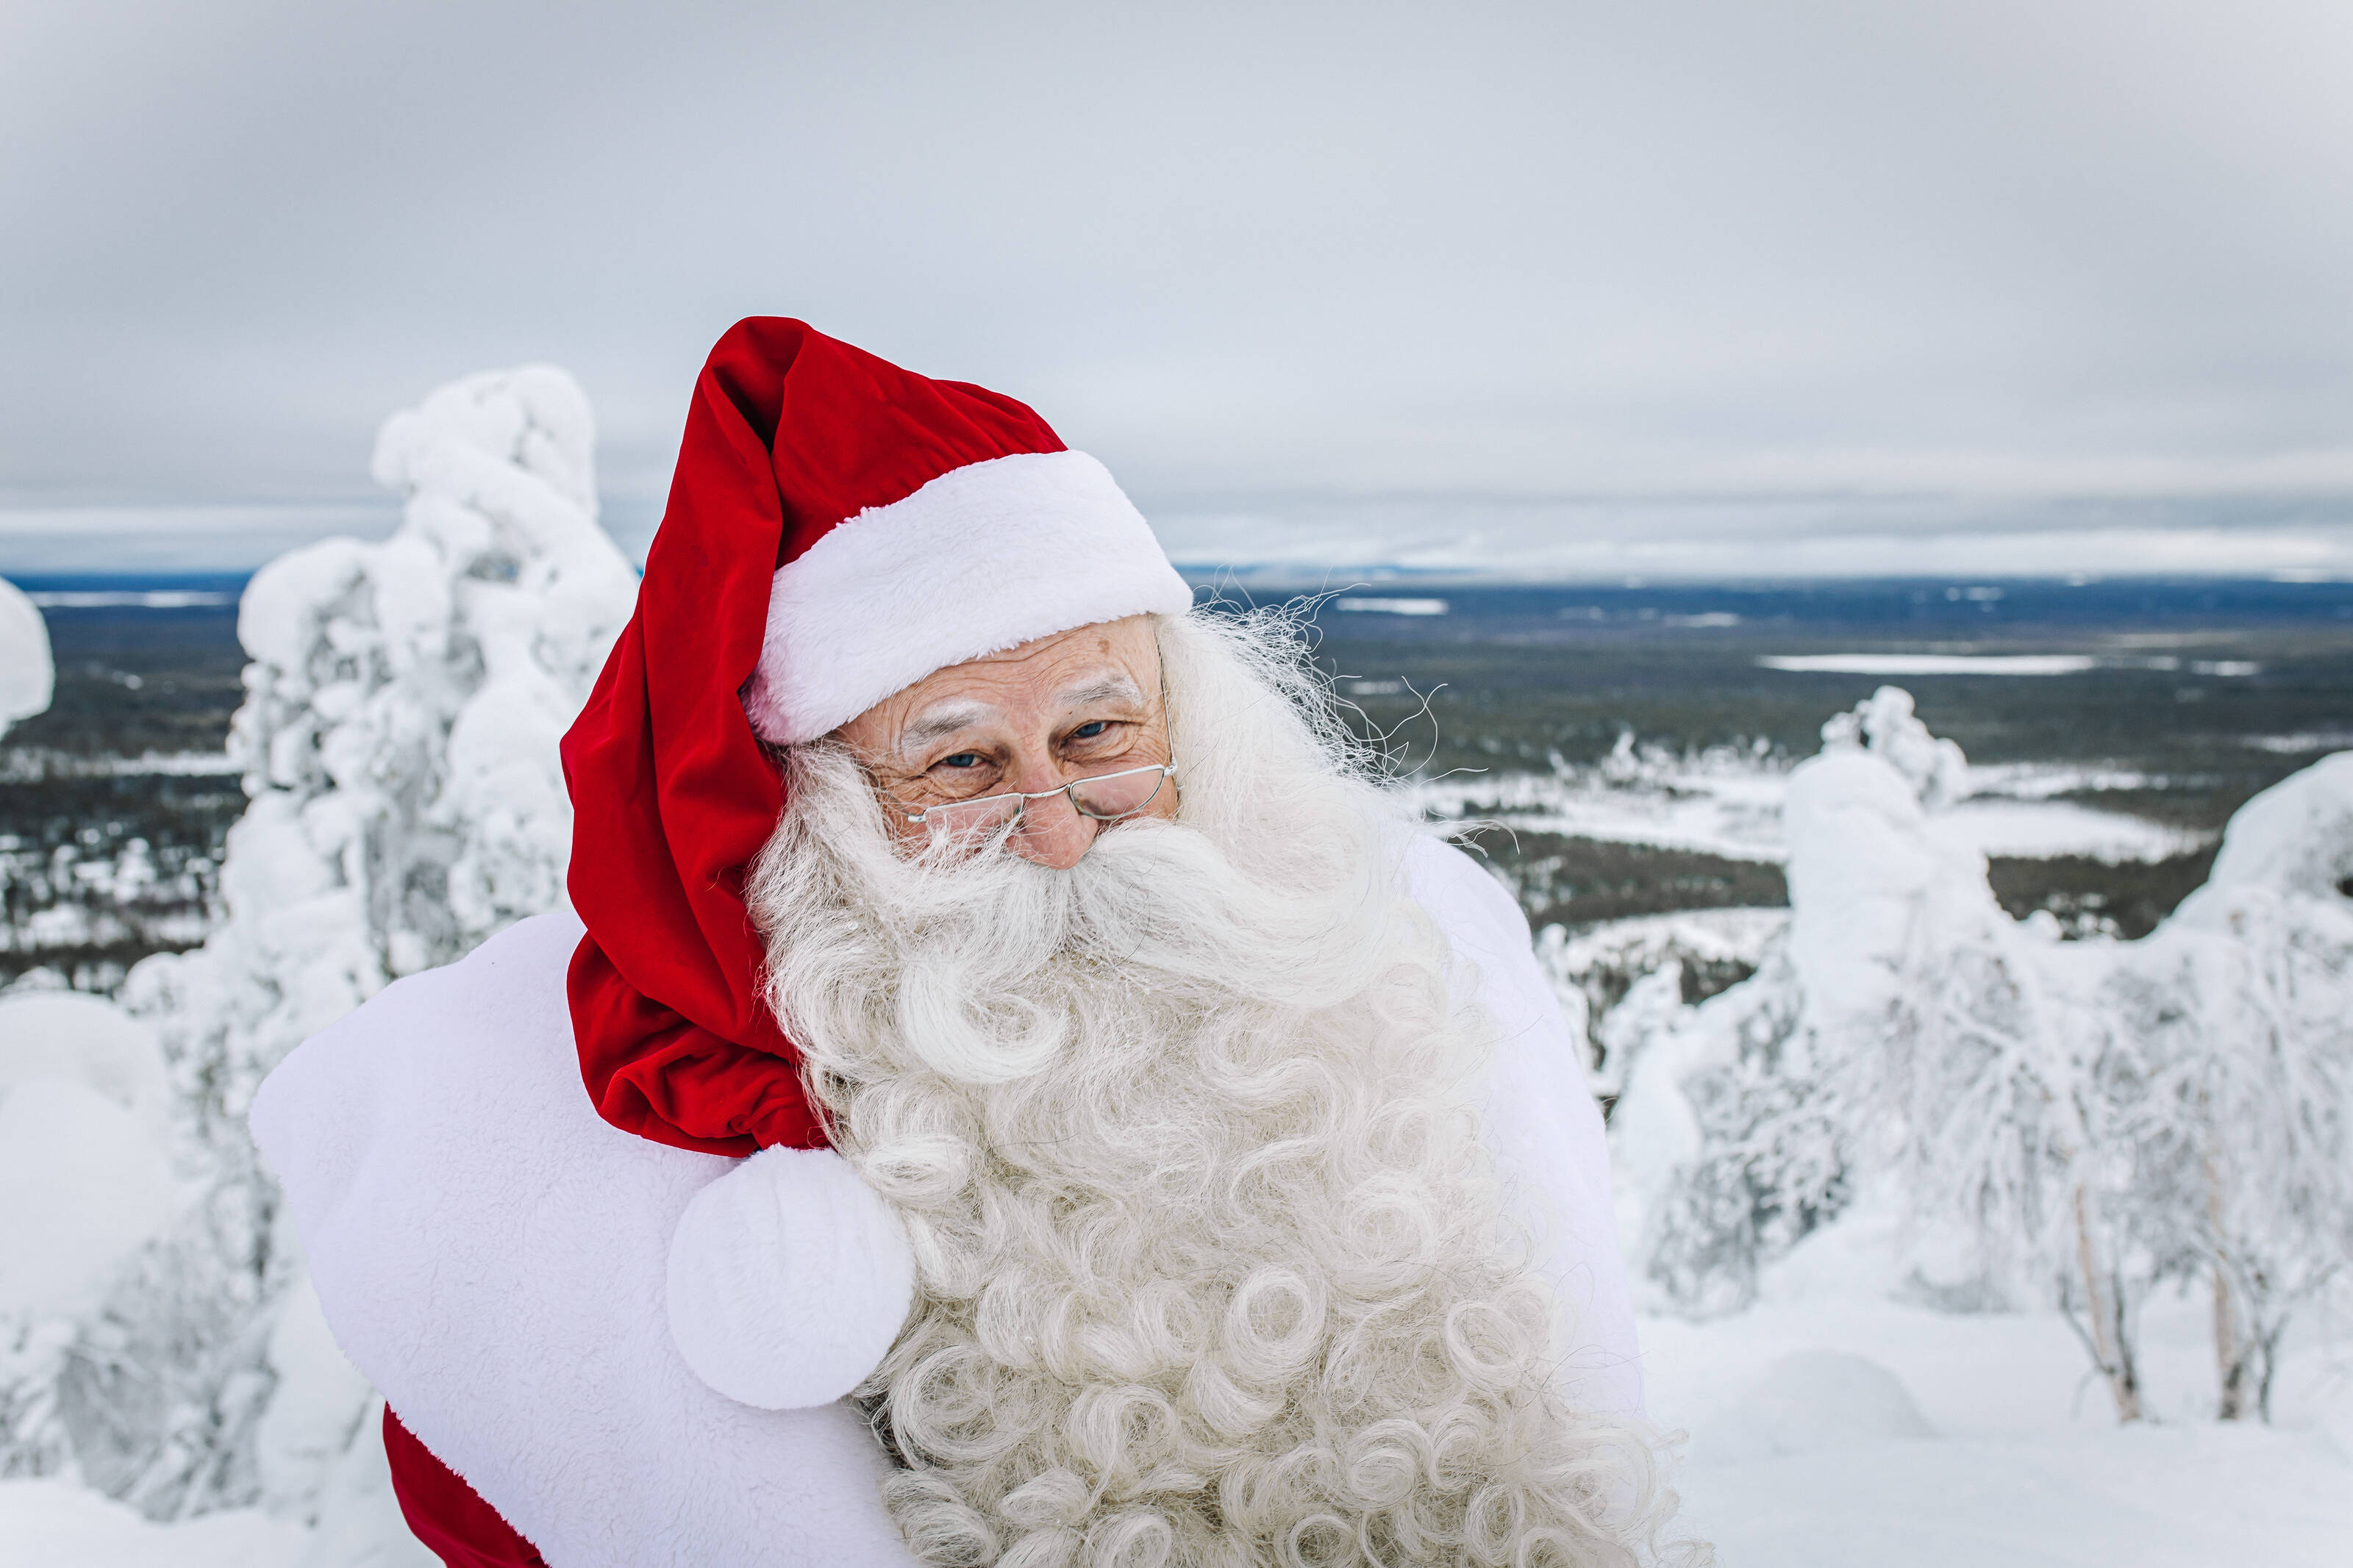 At home in the snowy winter landscape of Finnish Lapland, Santa Claus is preparing to traverse the globe delivering presents. Photo: Santa Claus Foundation/Visit Finland